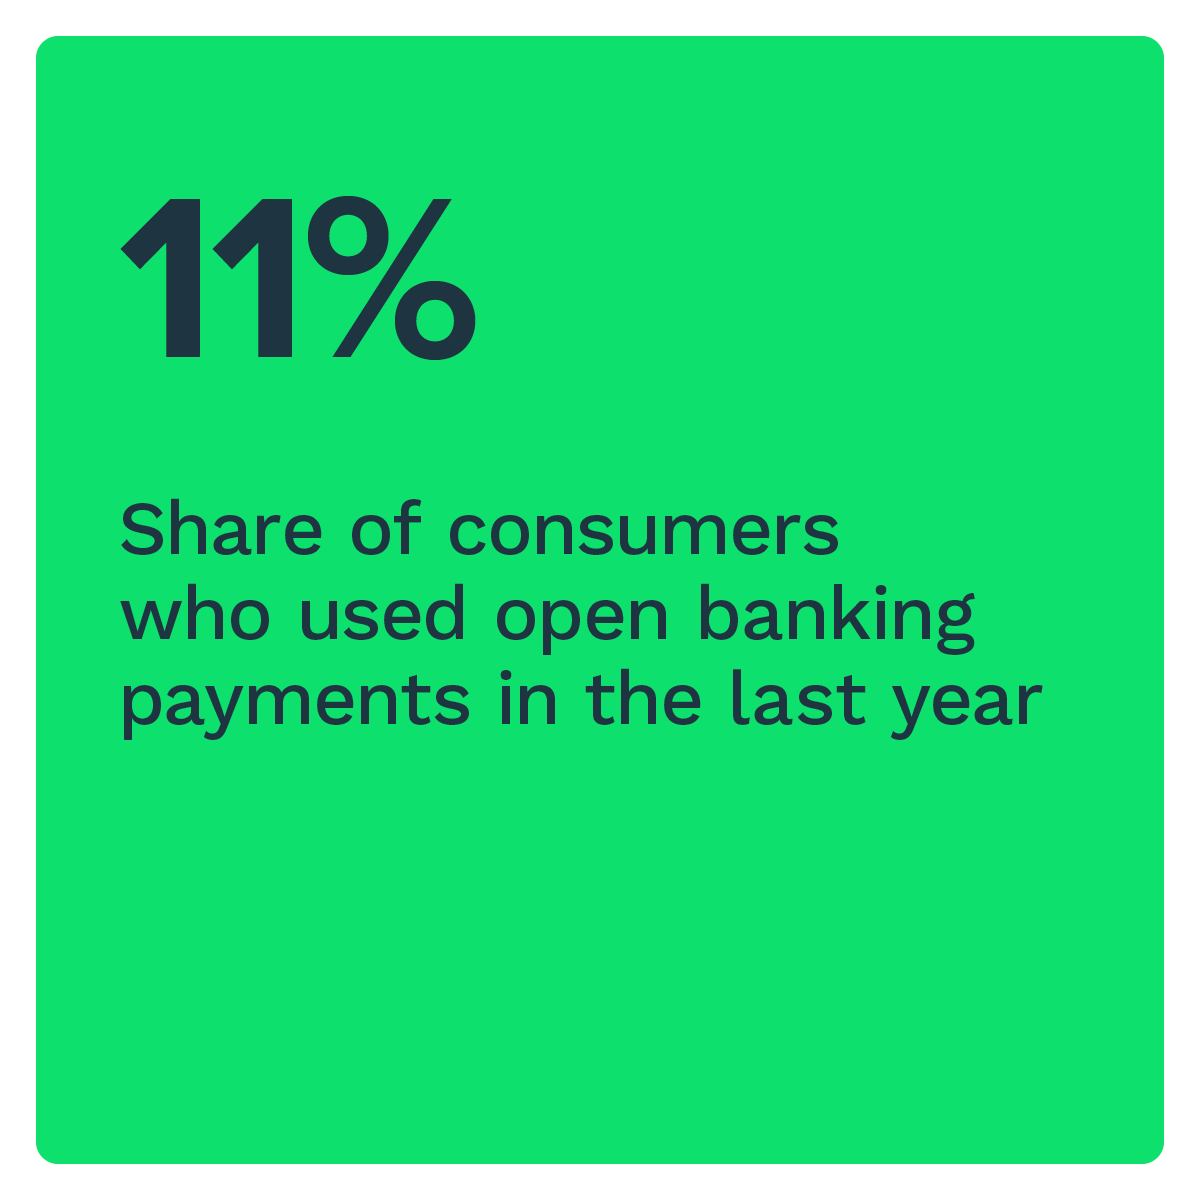 11%: Share of consumers that used open banking payments in the last year